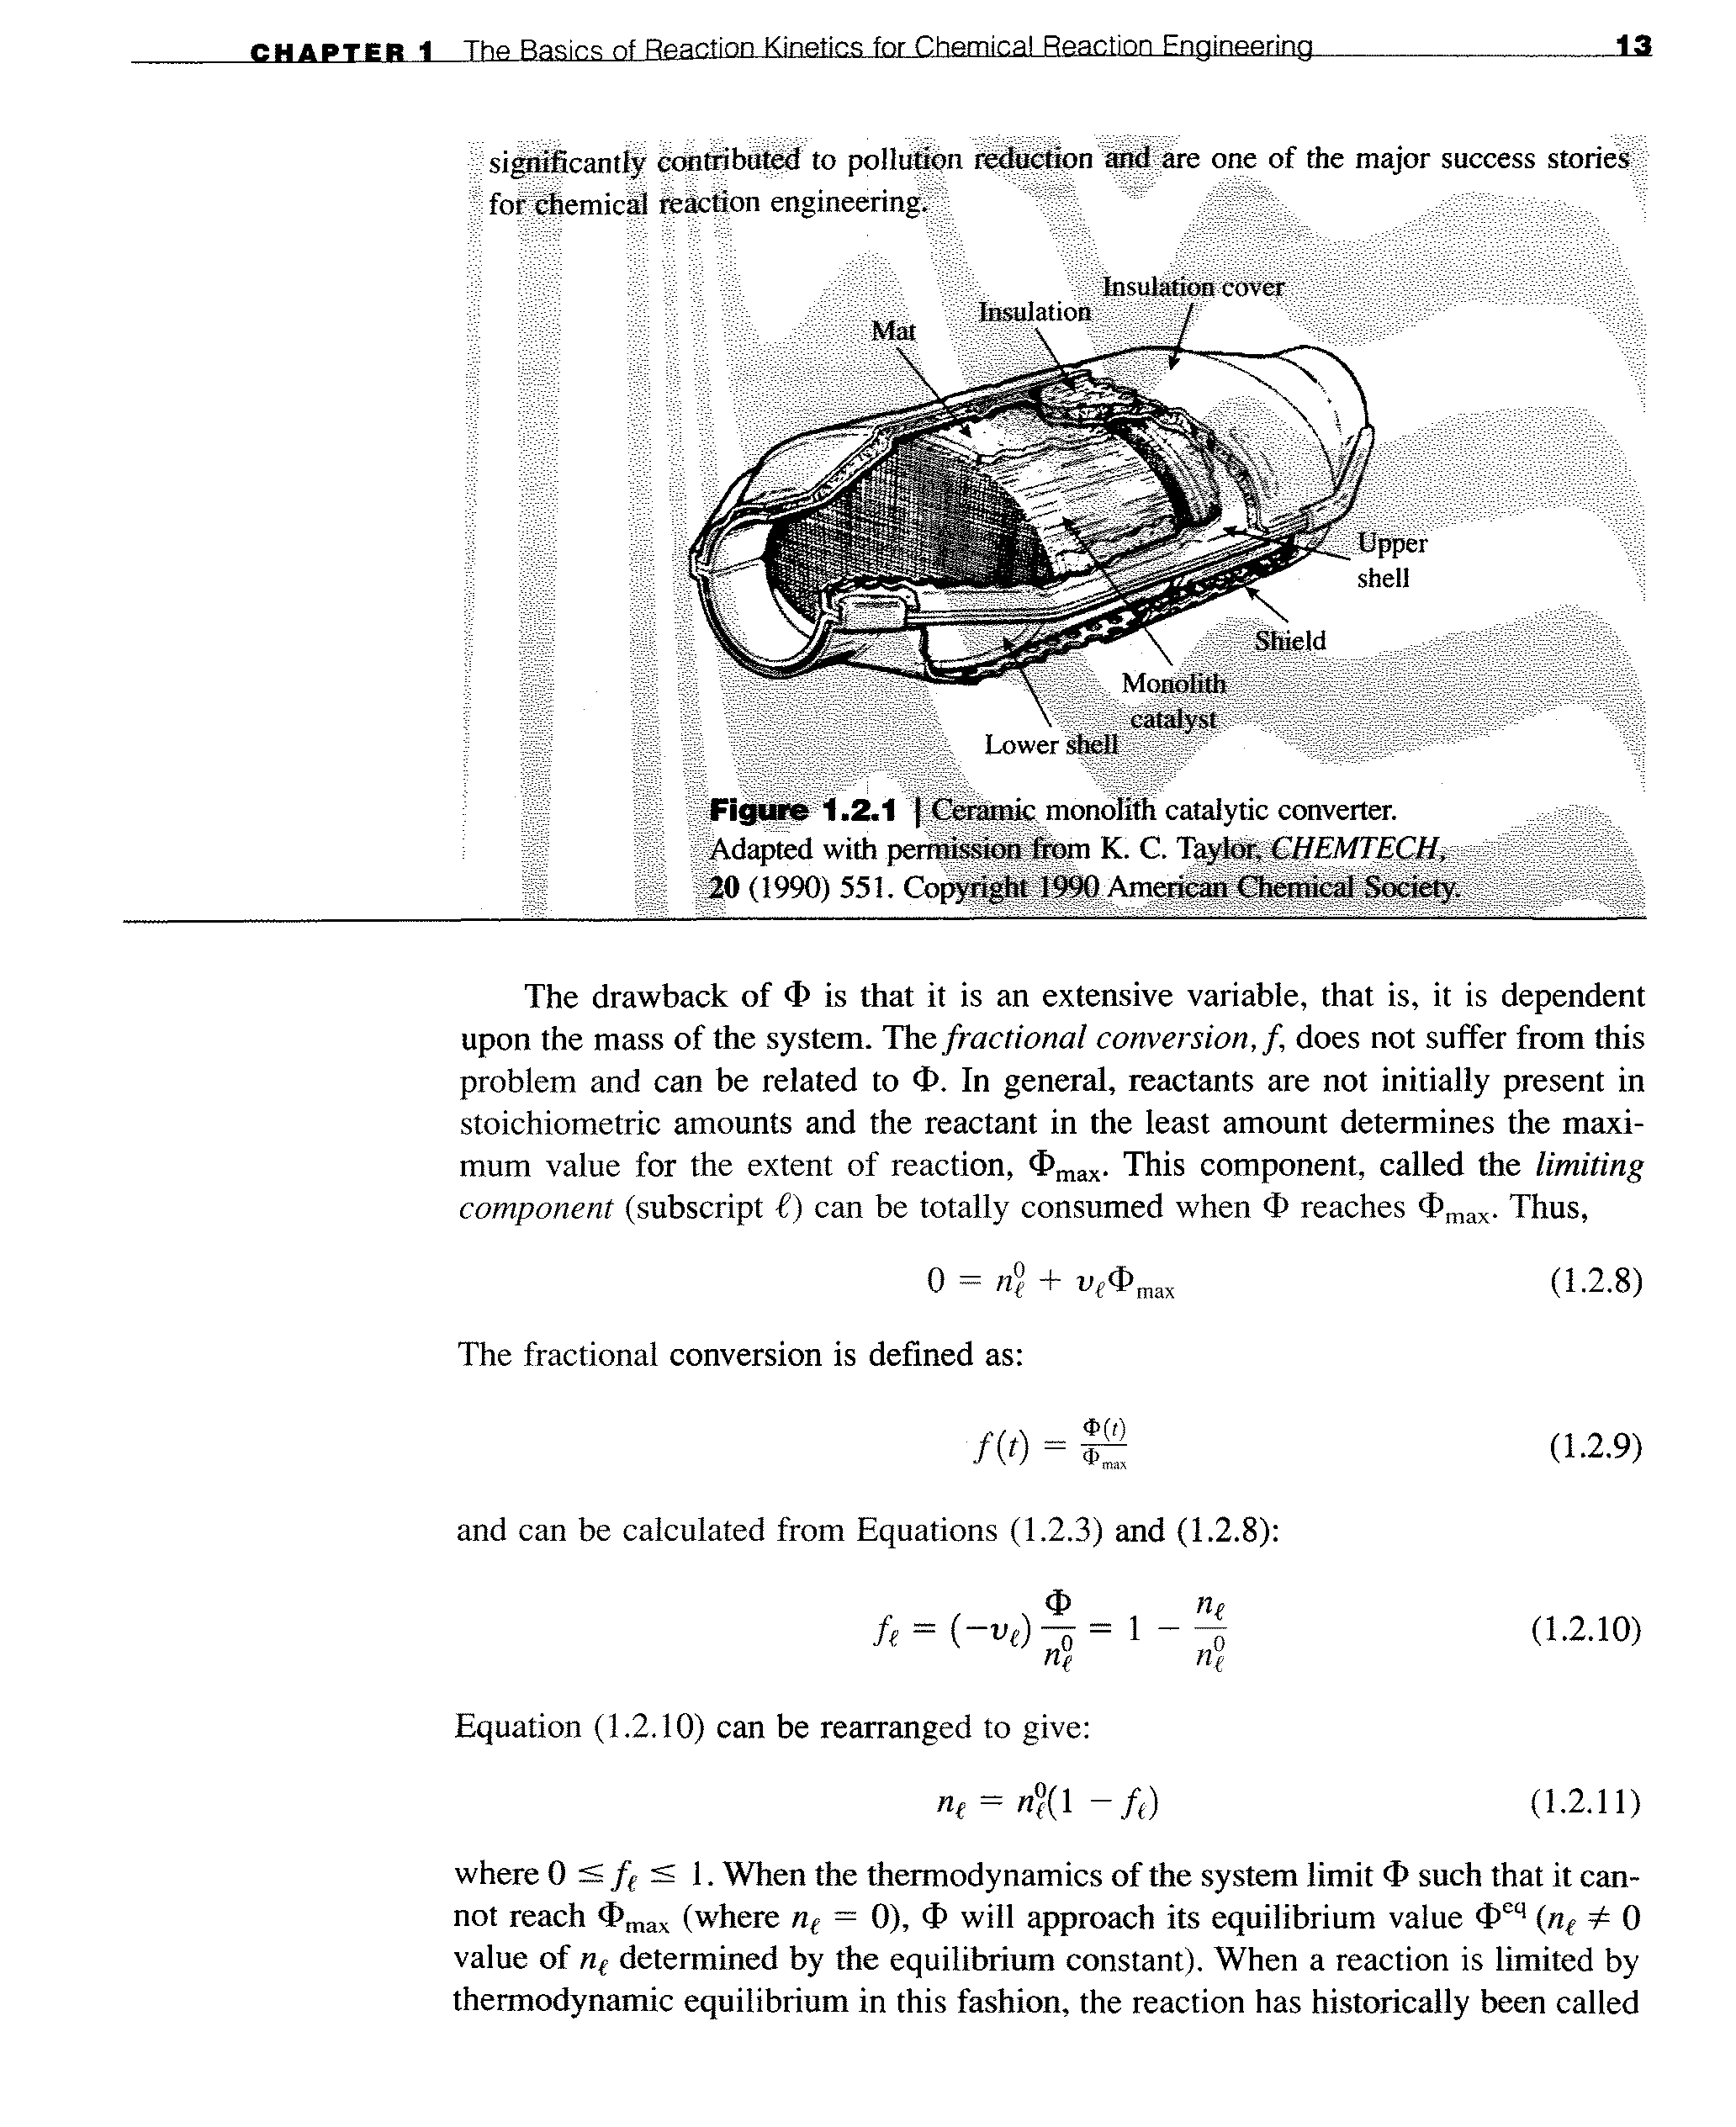 Figure 1.2.1 Ceramic monolith catalytic converter. Adapted with permission from K. C. laylor. CllfIMTI-X ll. 20 (1990) 551. Copyright 19 -)0. Aniericaii Chemical SiK iety.